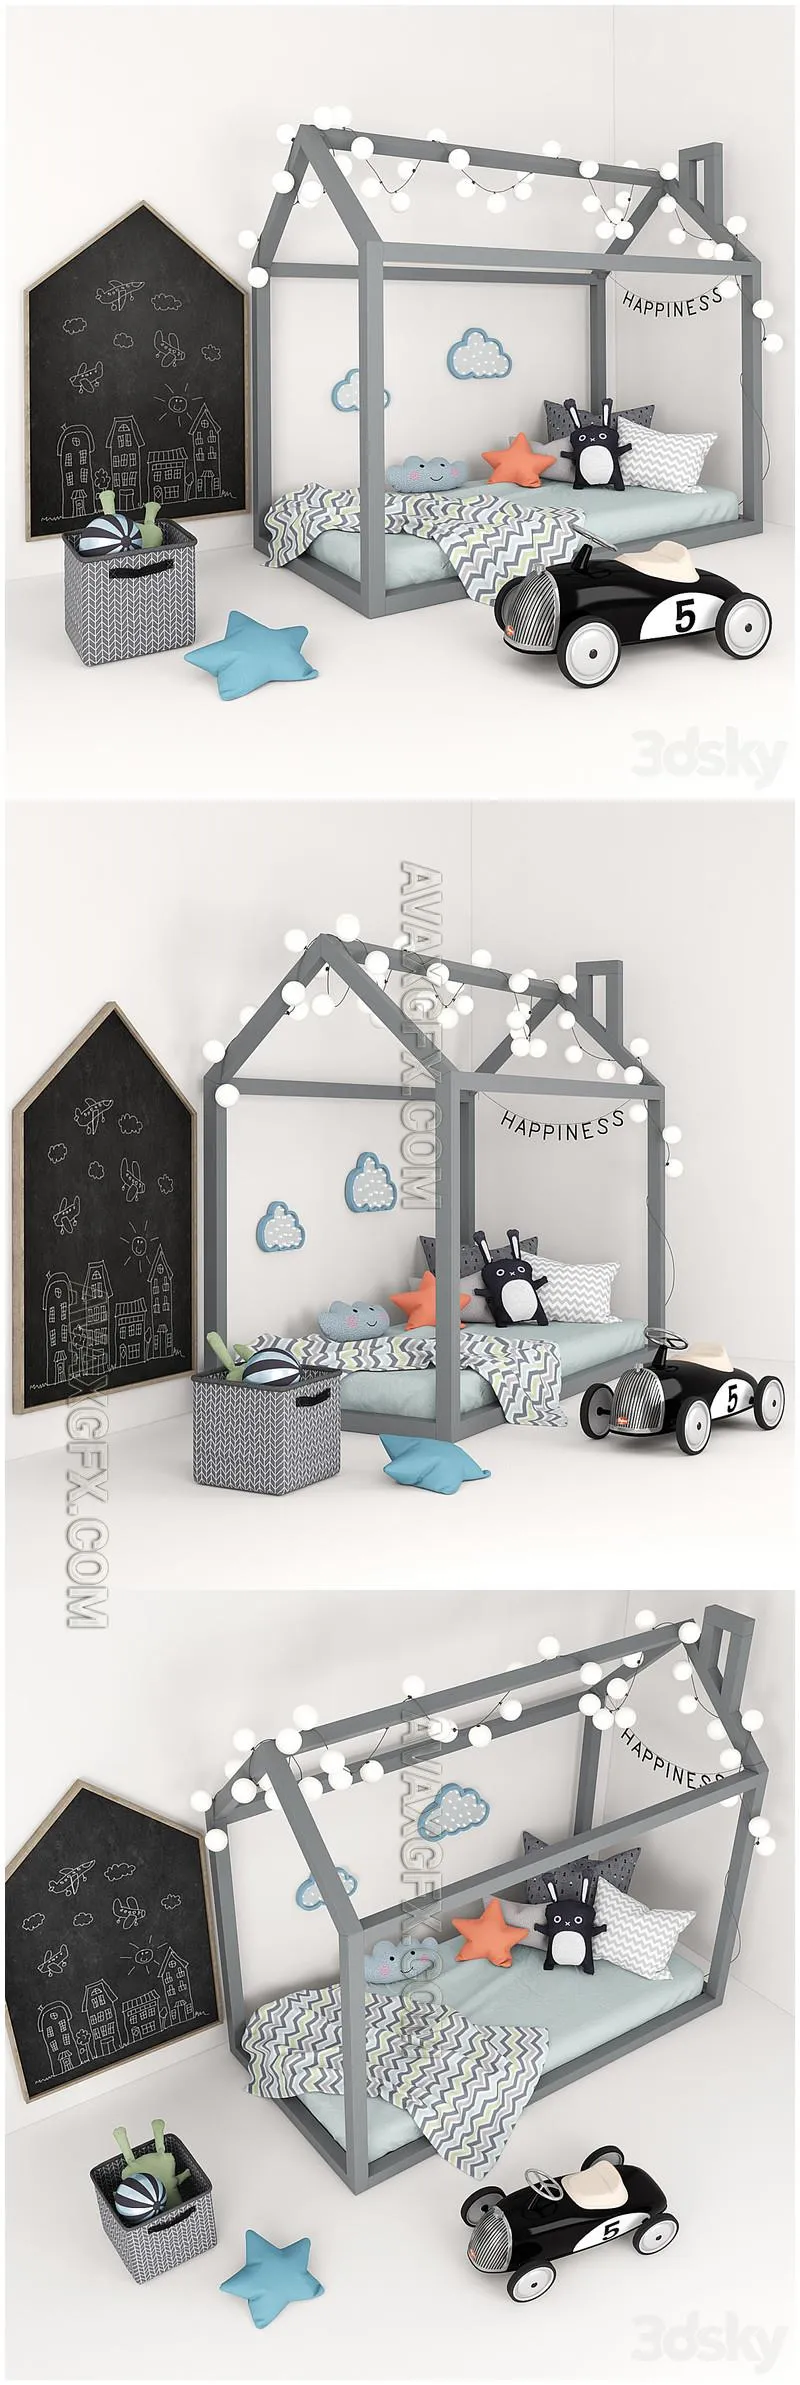 Bed-house with a set of accessories for children - 3D Model